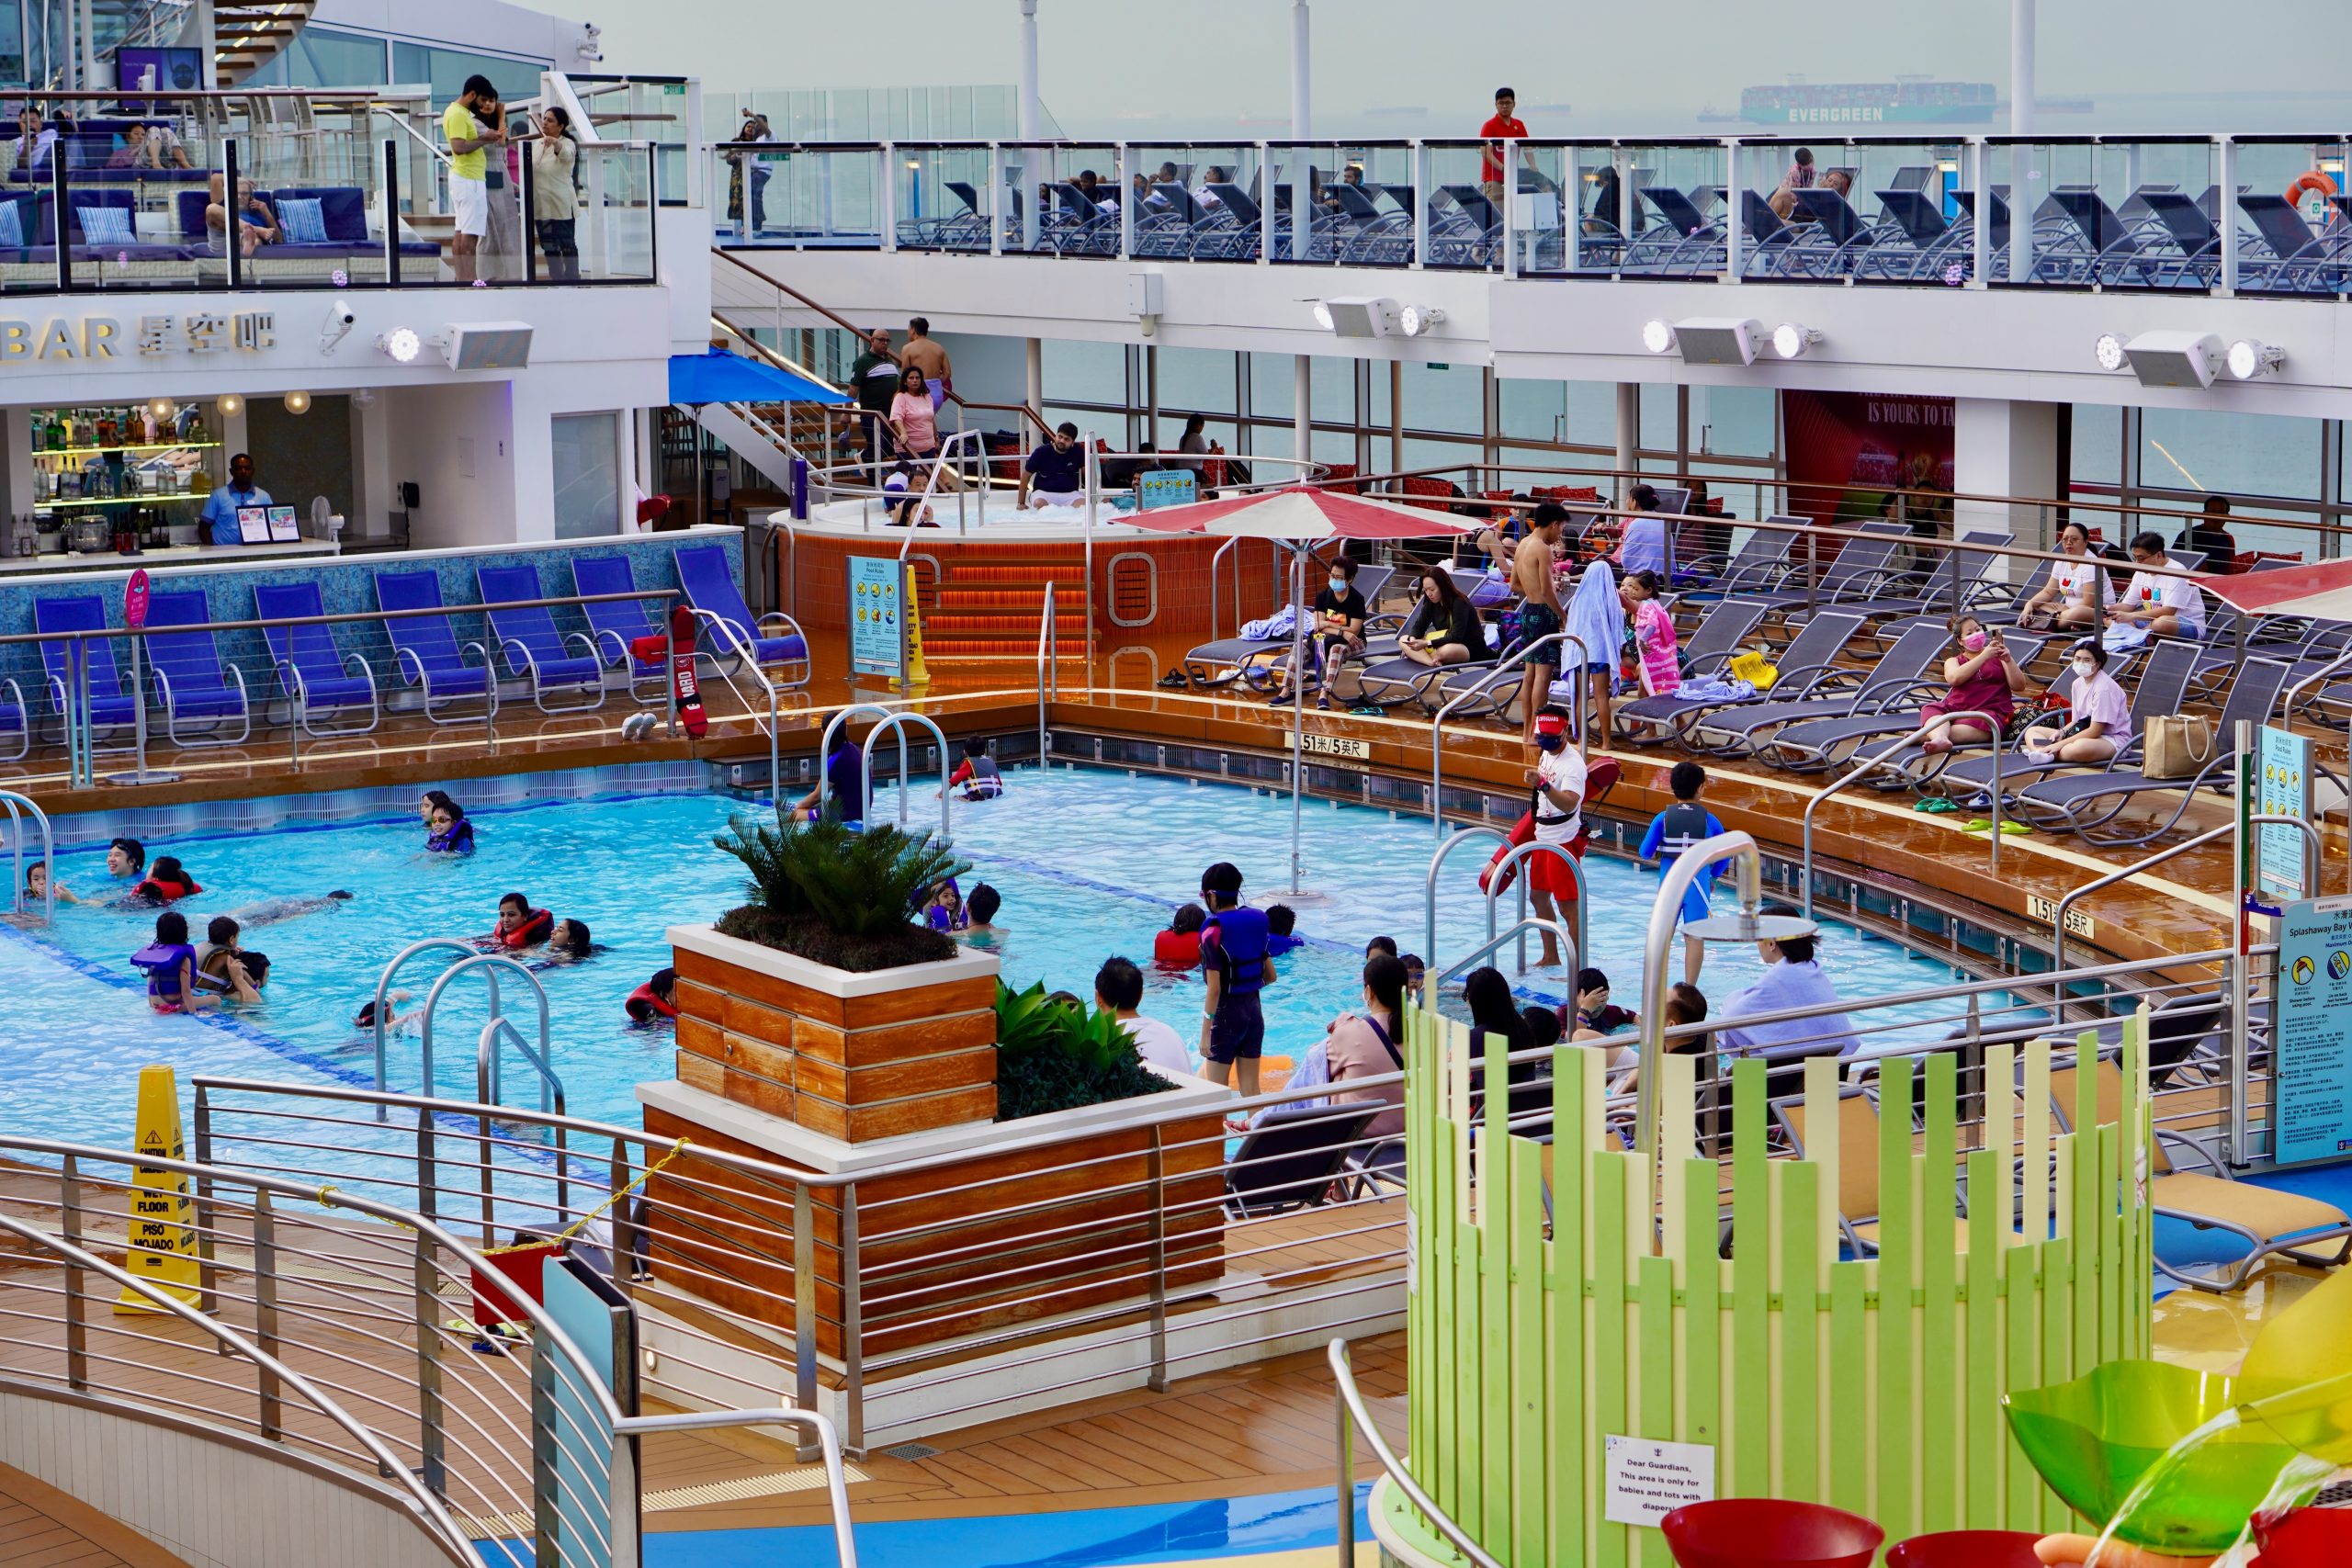 Are Luxury Cruises a Good Option for Families?